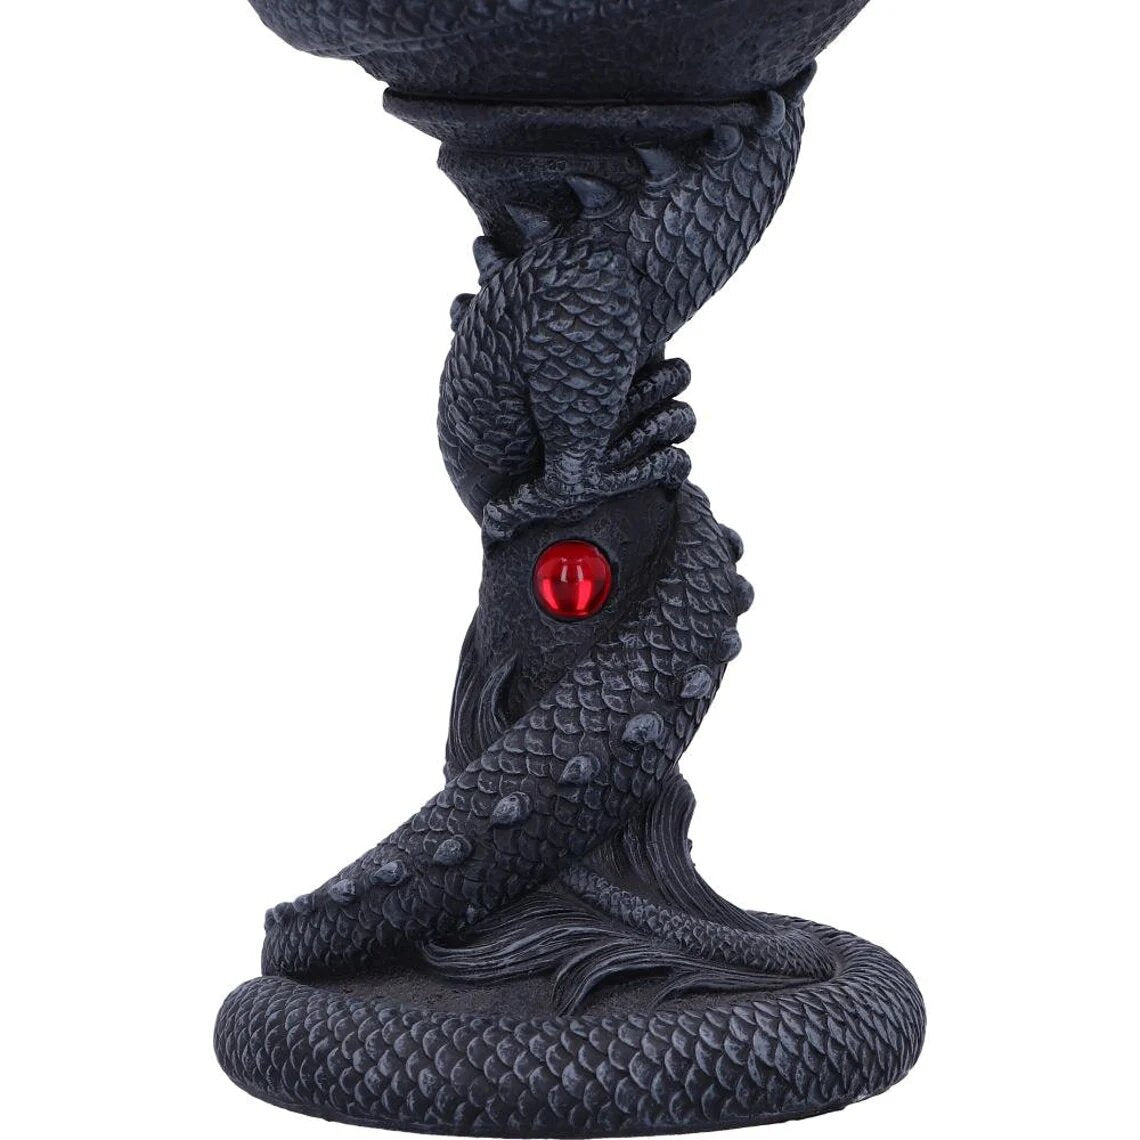 EMERGE Dragon Coil Goblet 20cm Dragons Home Decor Collectible Goblets & Chalices Gifts Wine Glass